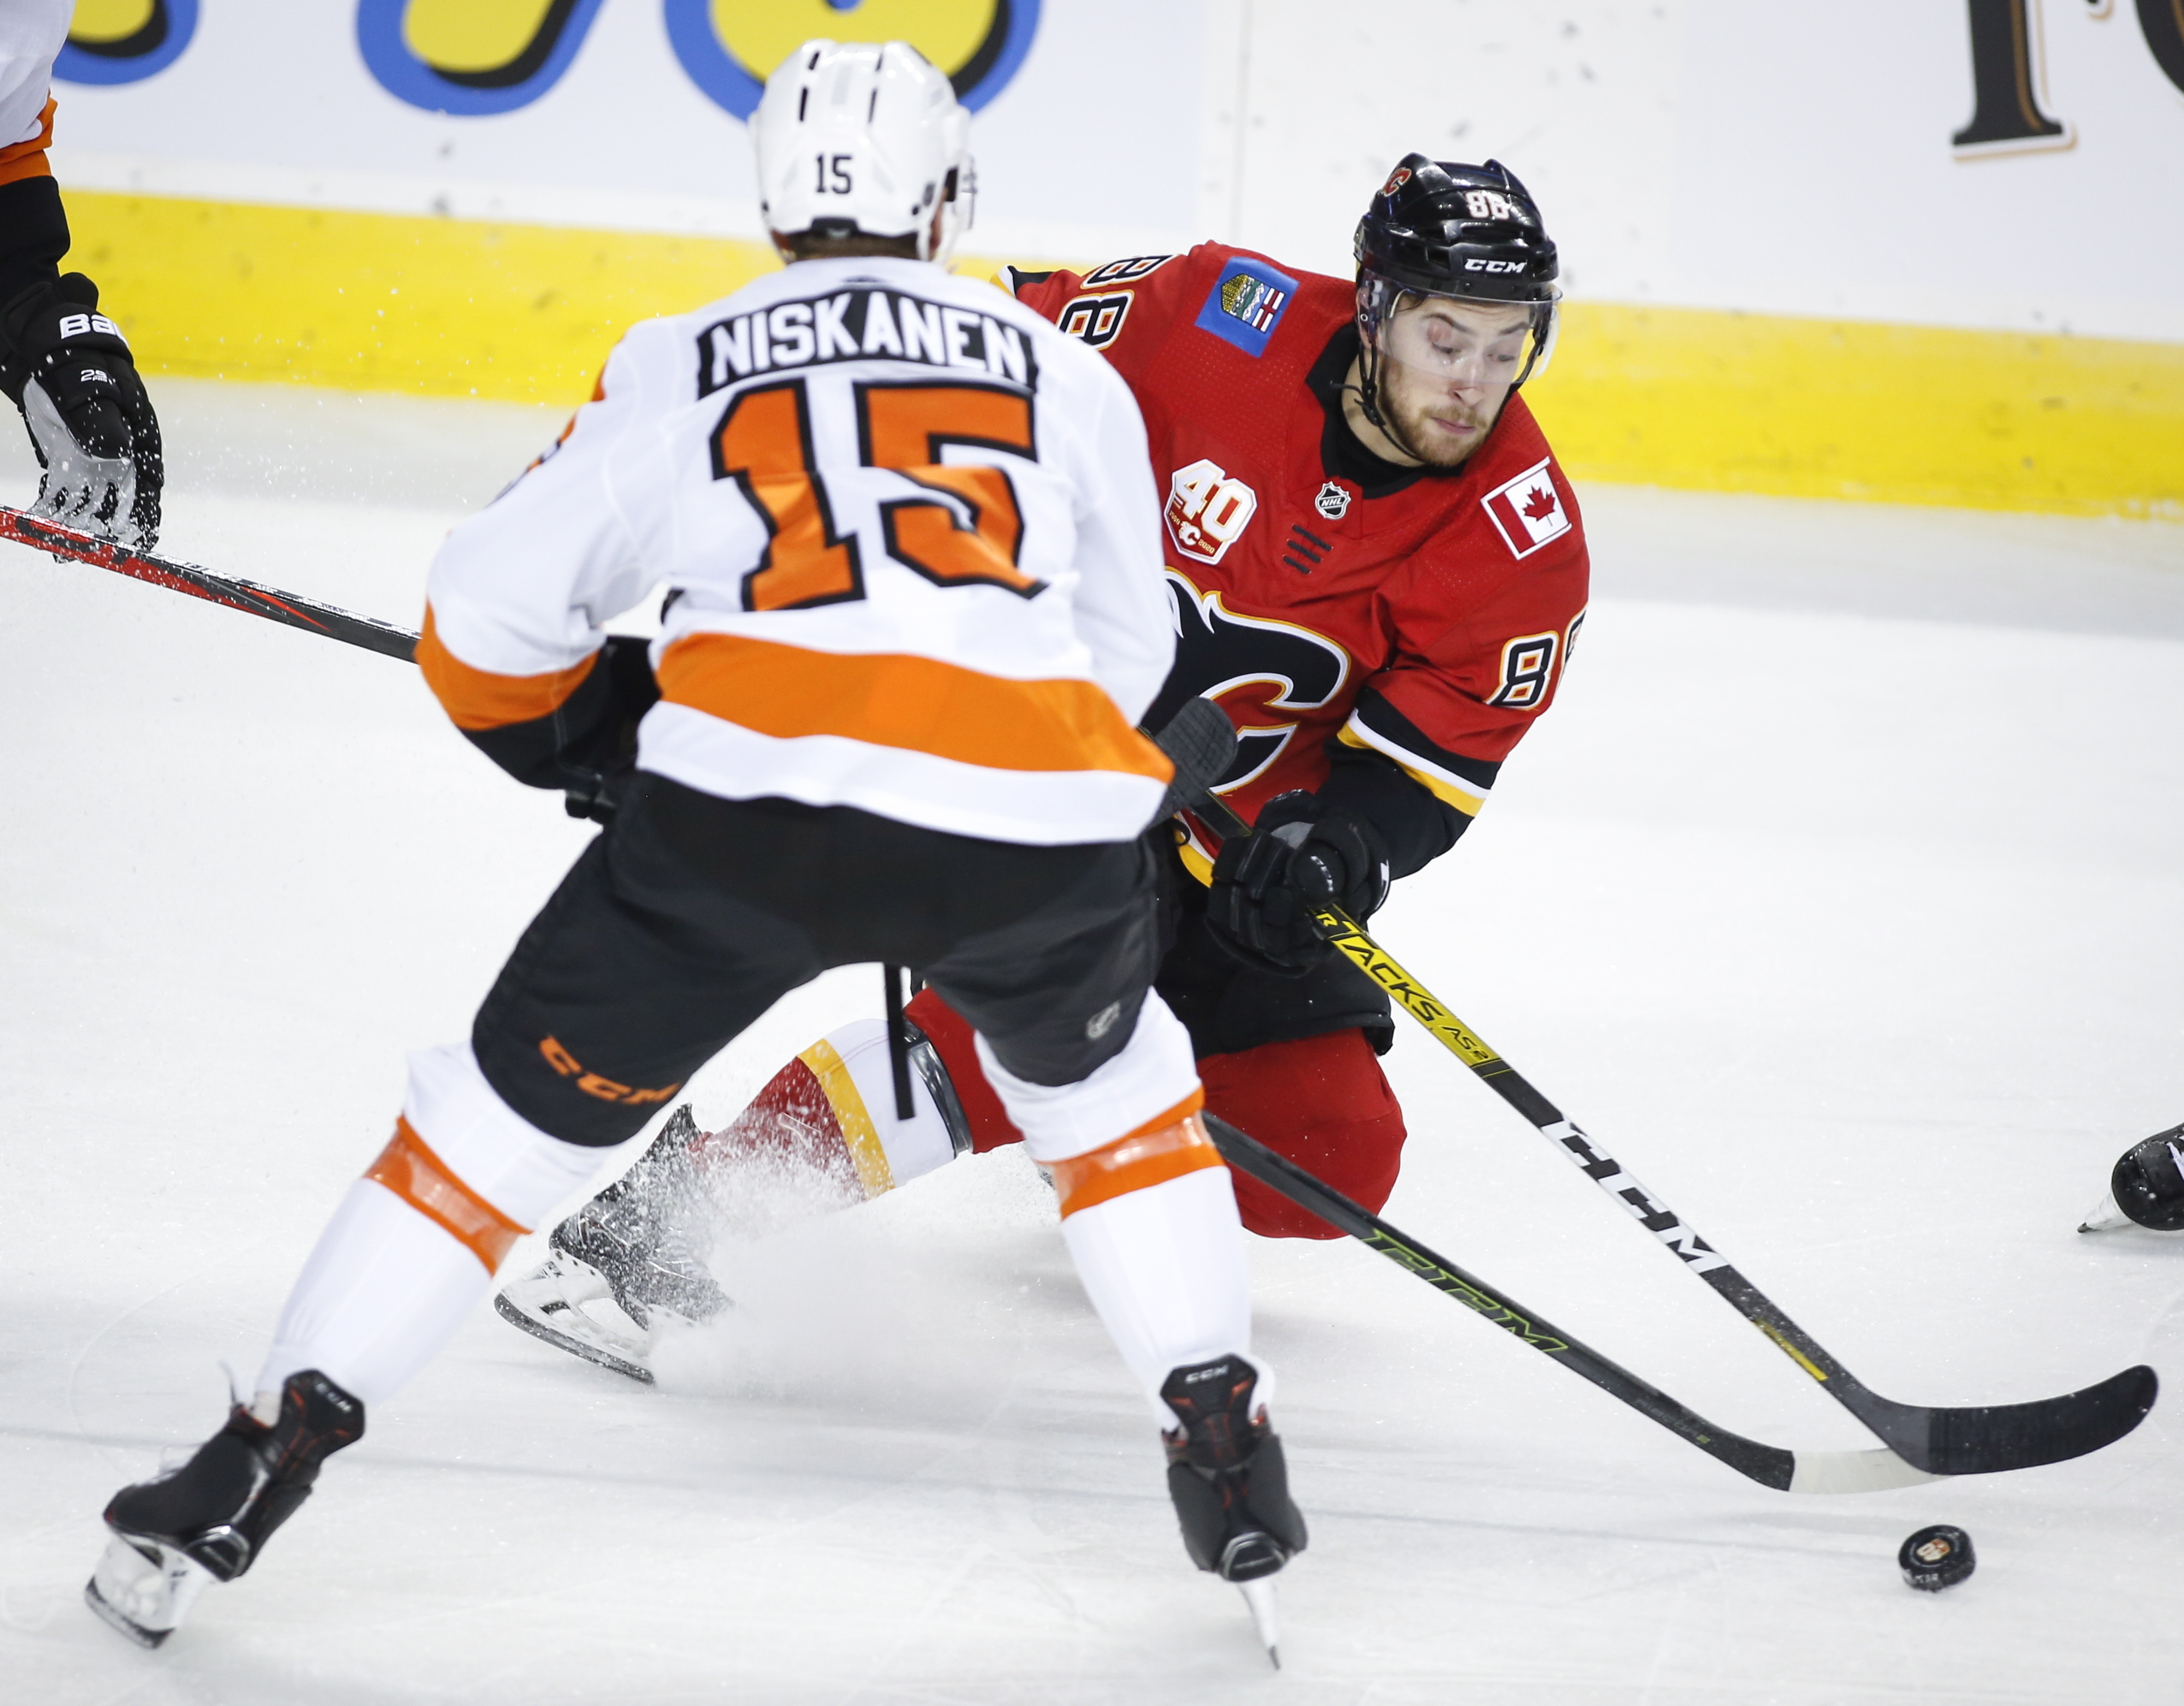 Frolik scores in his 800th NHL game, Flames beat Flyers 3-1